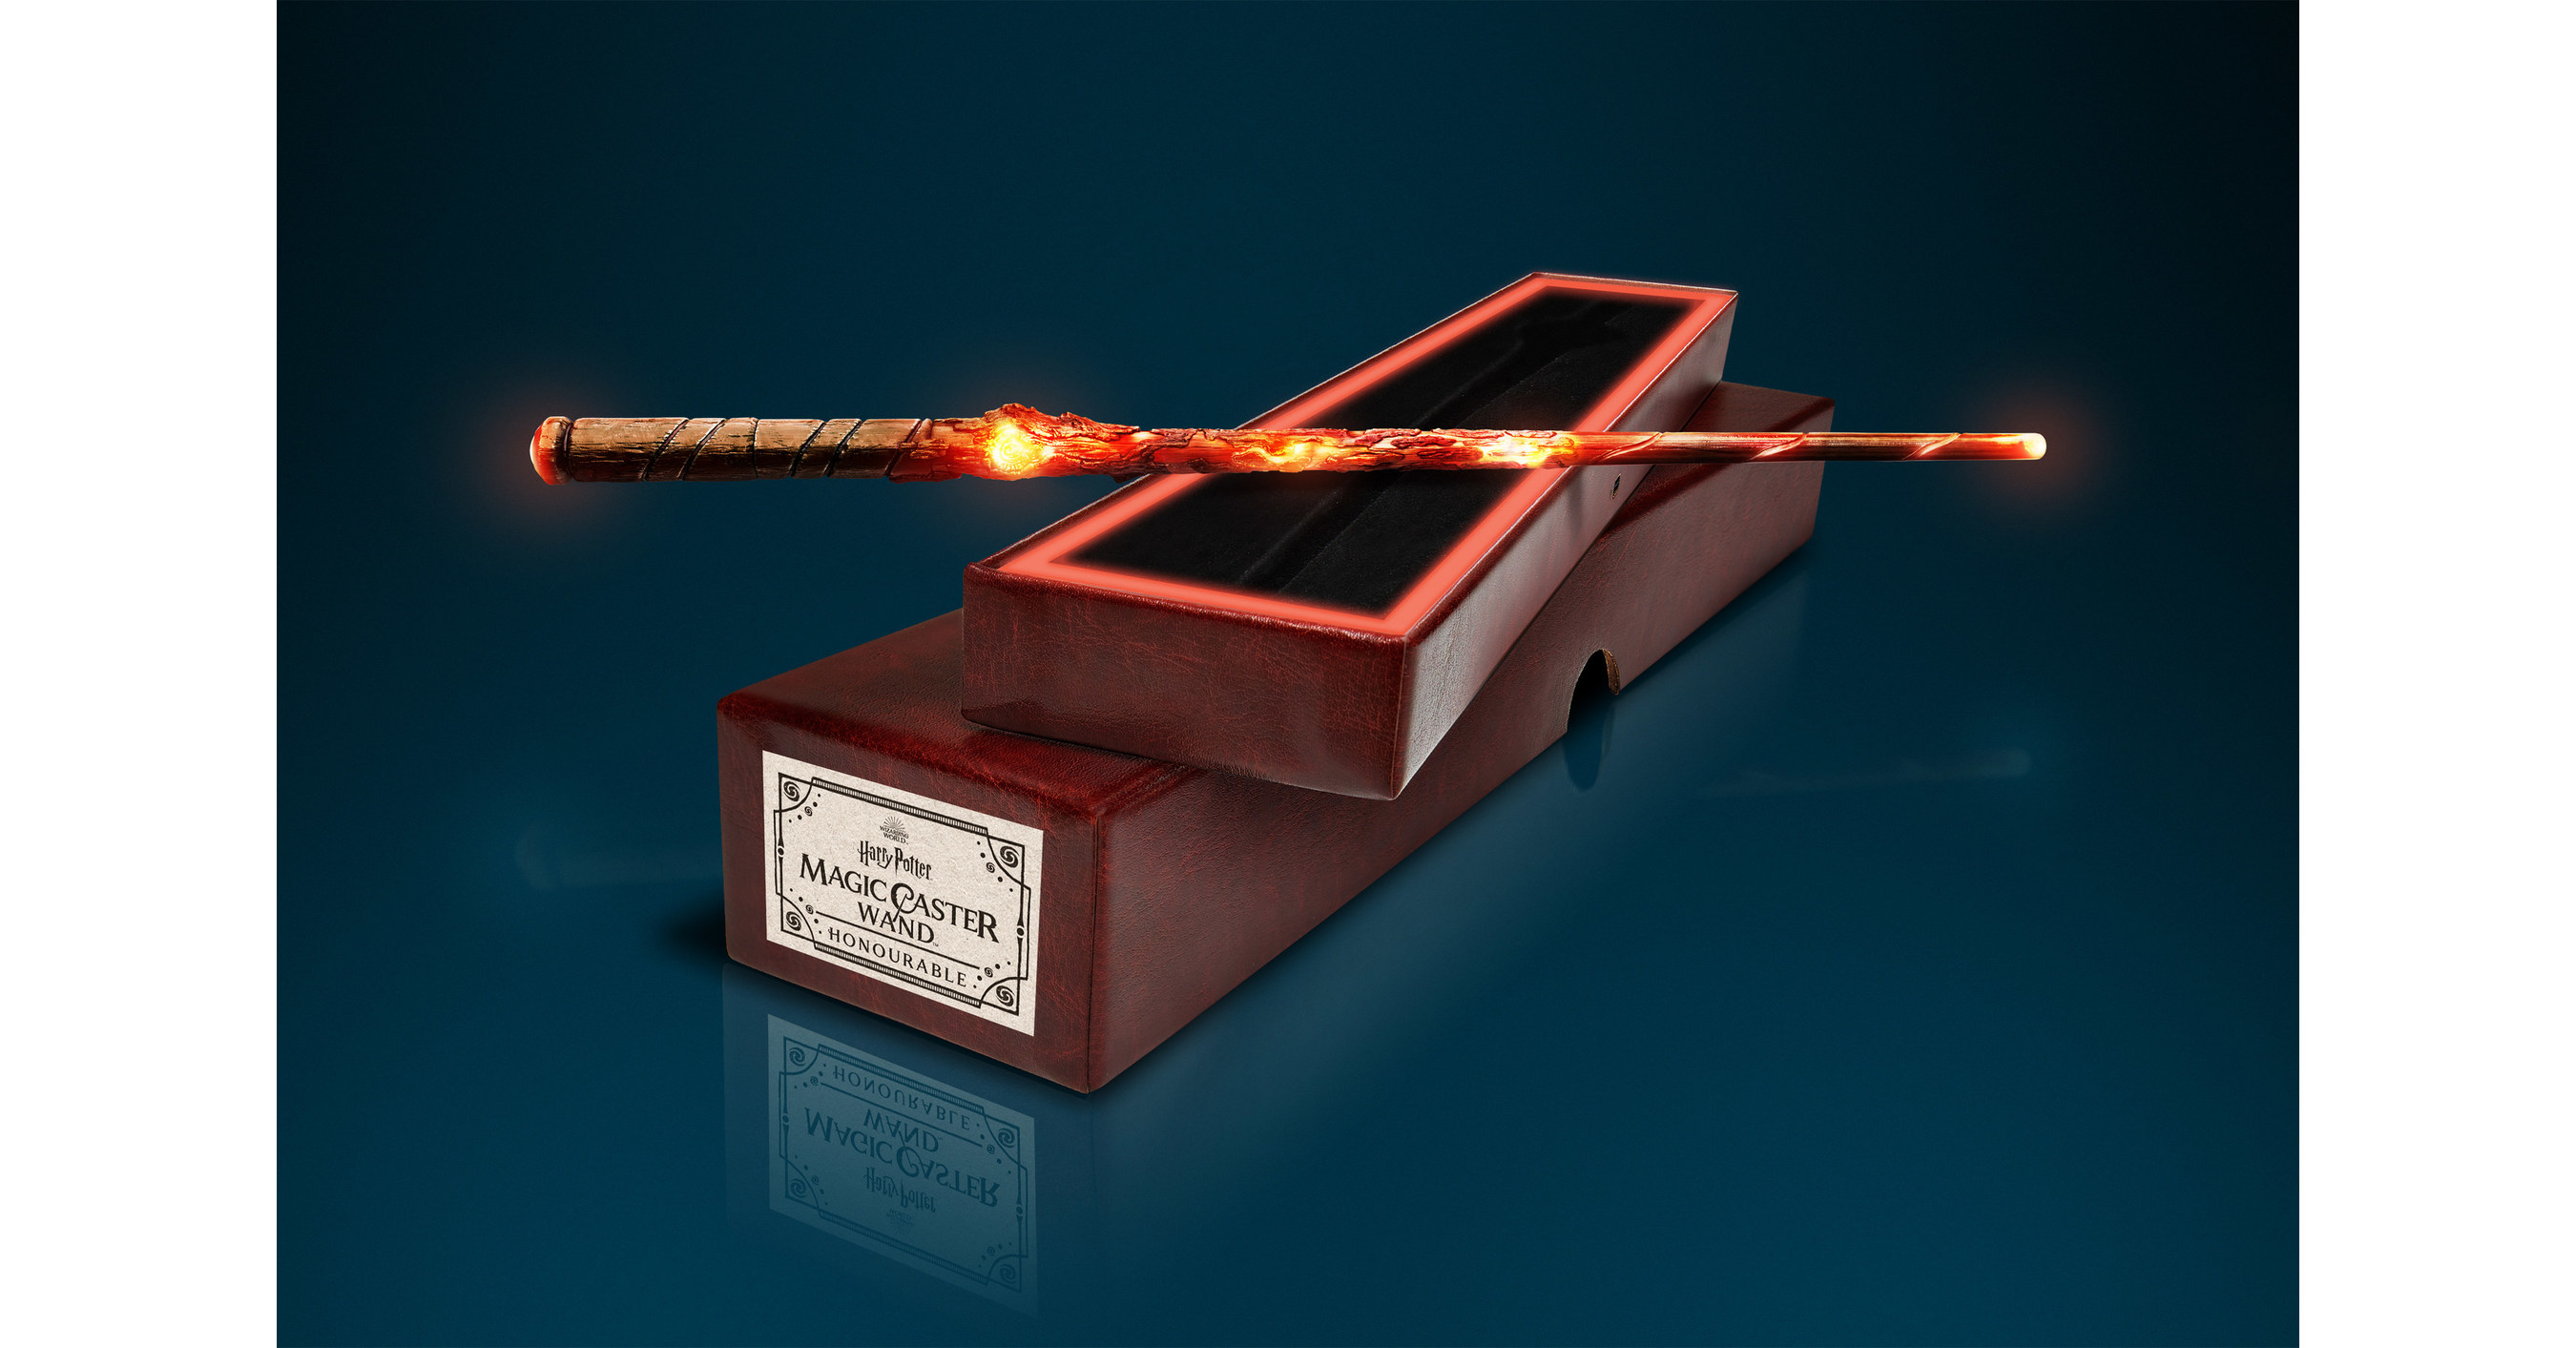 hardop sociaal in plaats daarvan MAKE EVERY DAY MAGICAL WITH THE LAUNCH OF THE NEW HARRY POTTER: MAGIC  CASTER WAND™